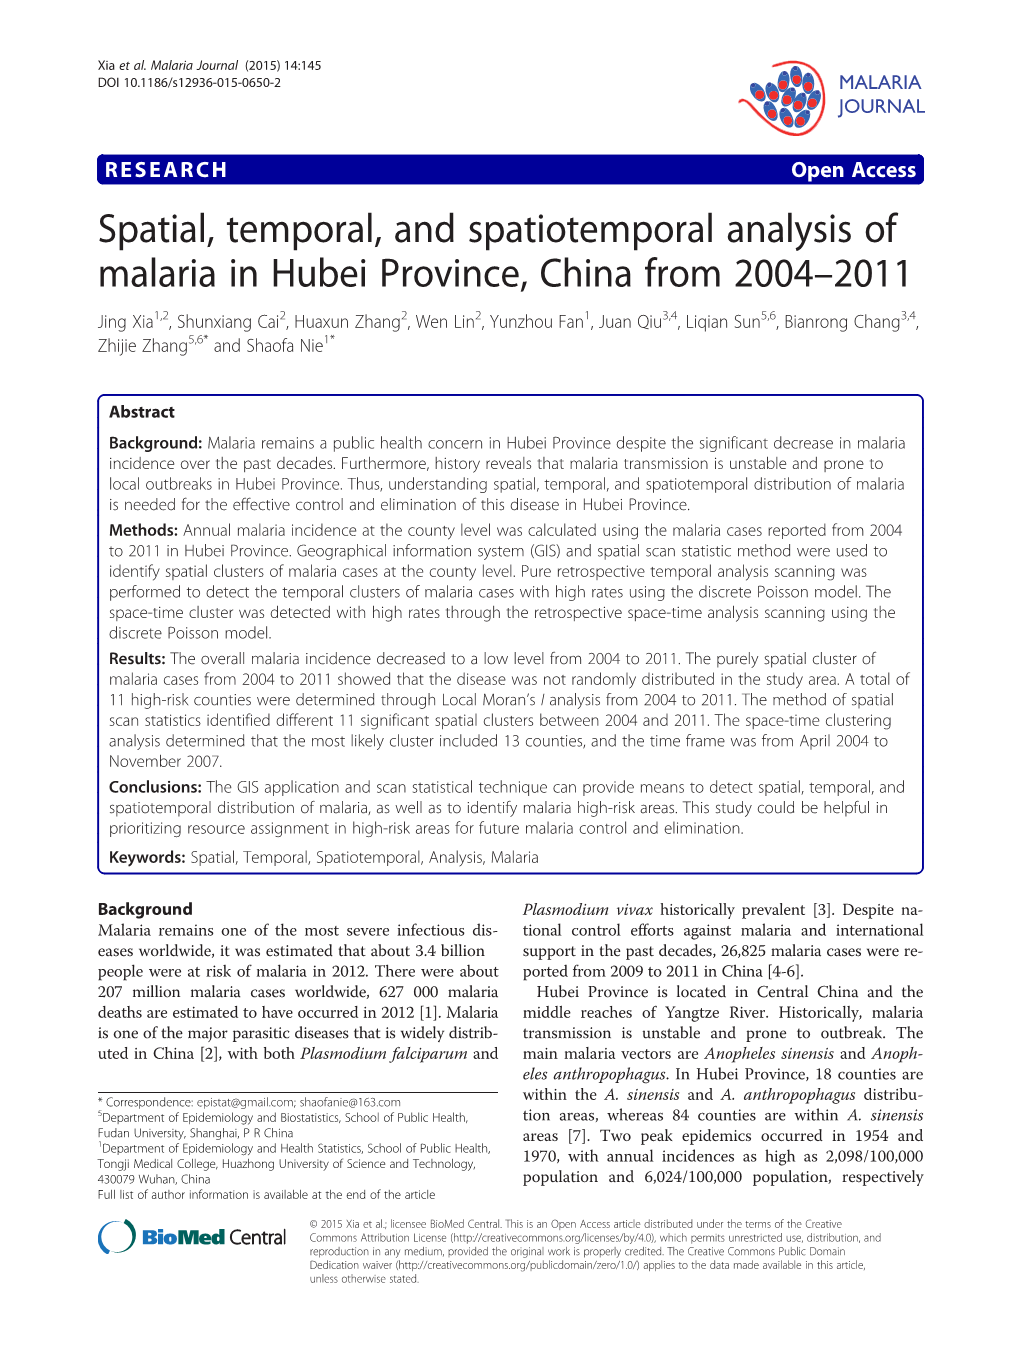 Spatial, Temporal, and Spatiotemporal Analysis of Malaria in Hubei